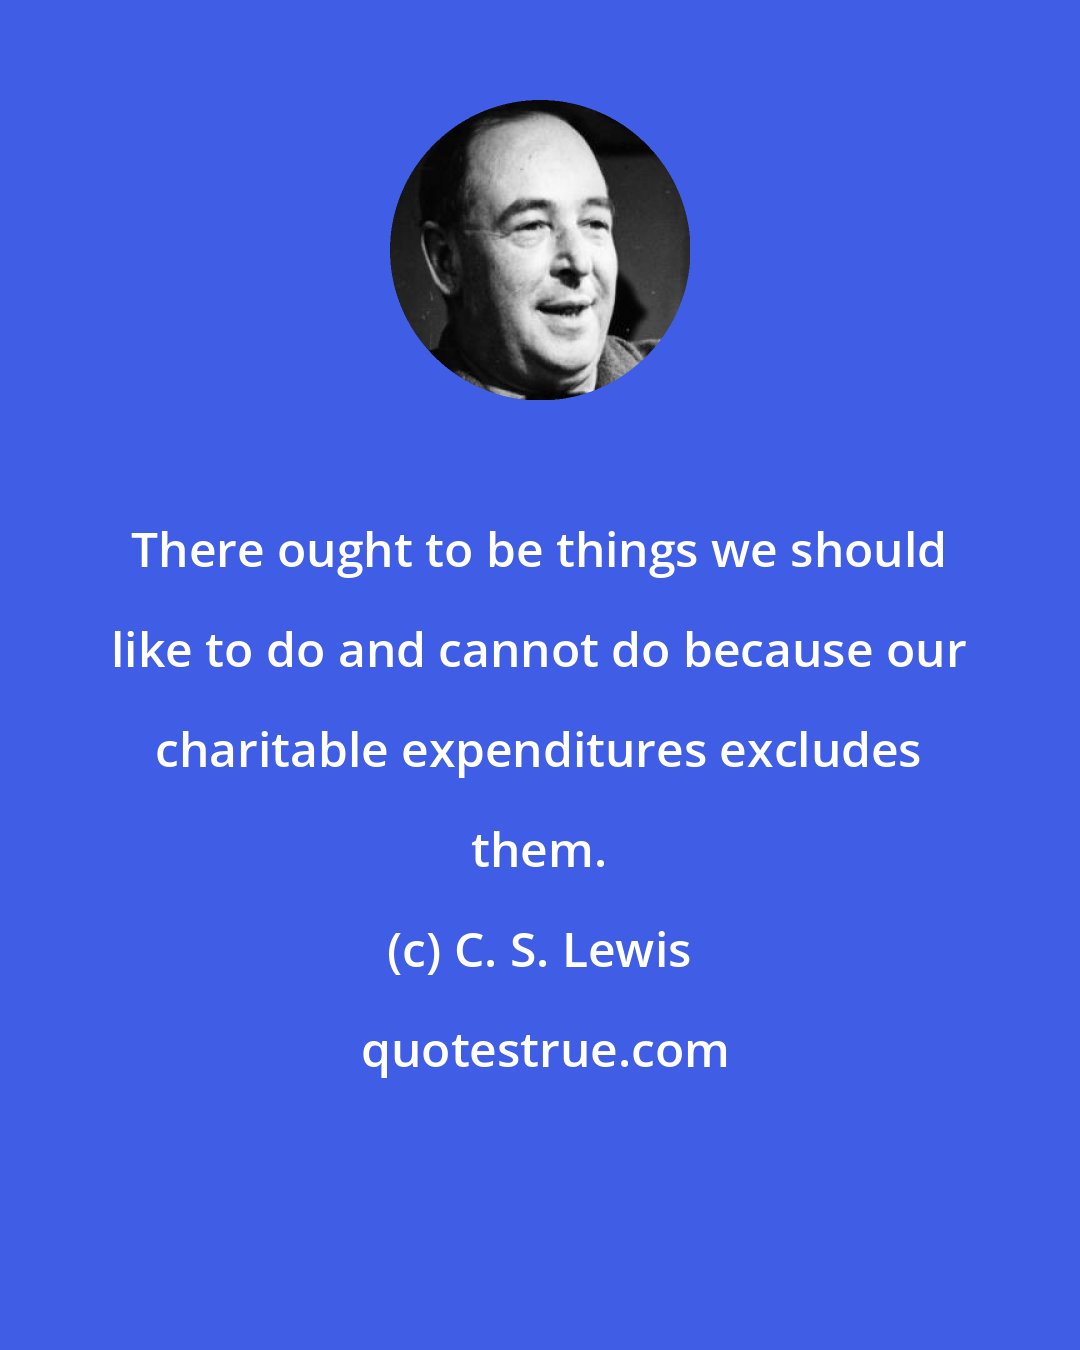 C. S. Lewis: There ought to be things we should like to do and cannot do because our charitable expenditures excludes them.